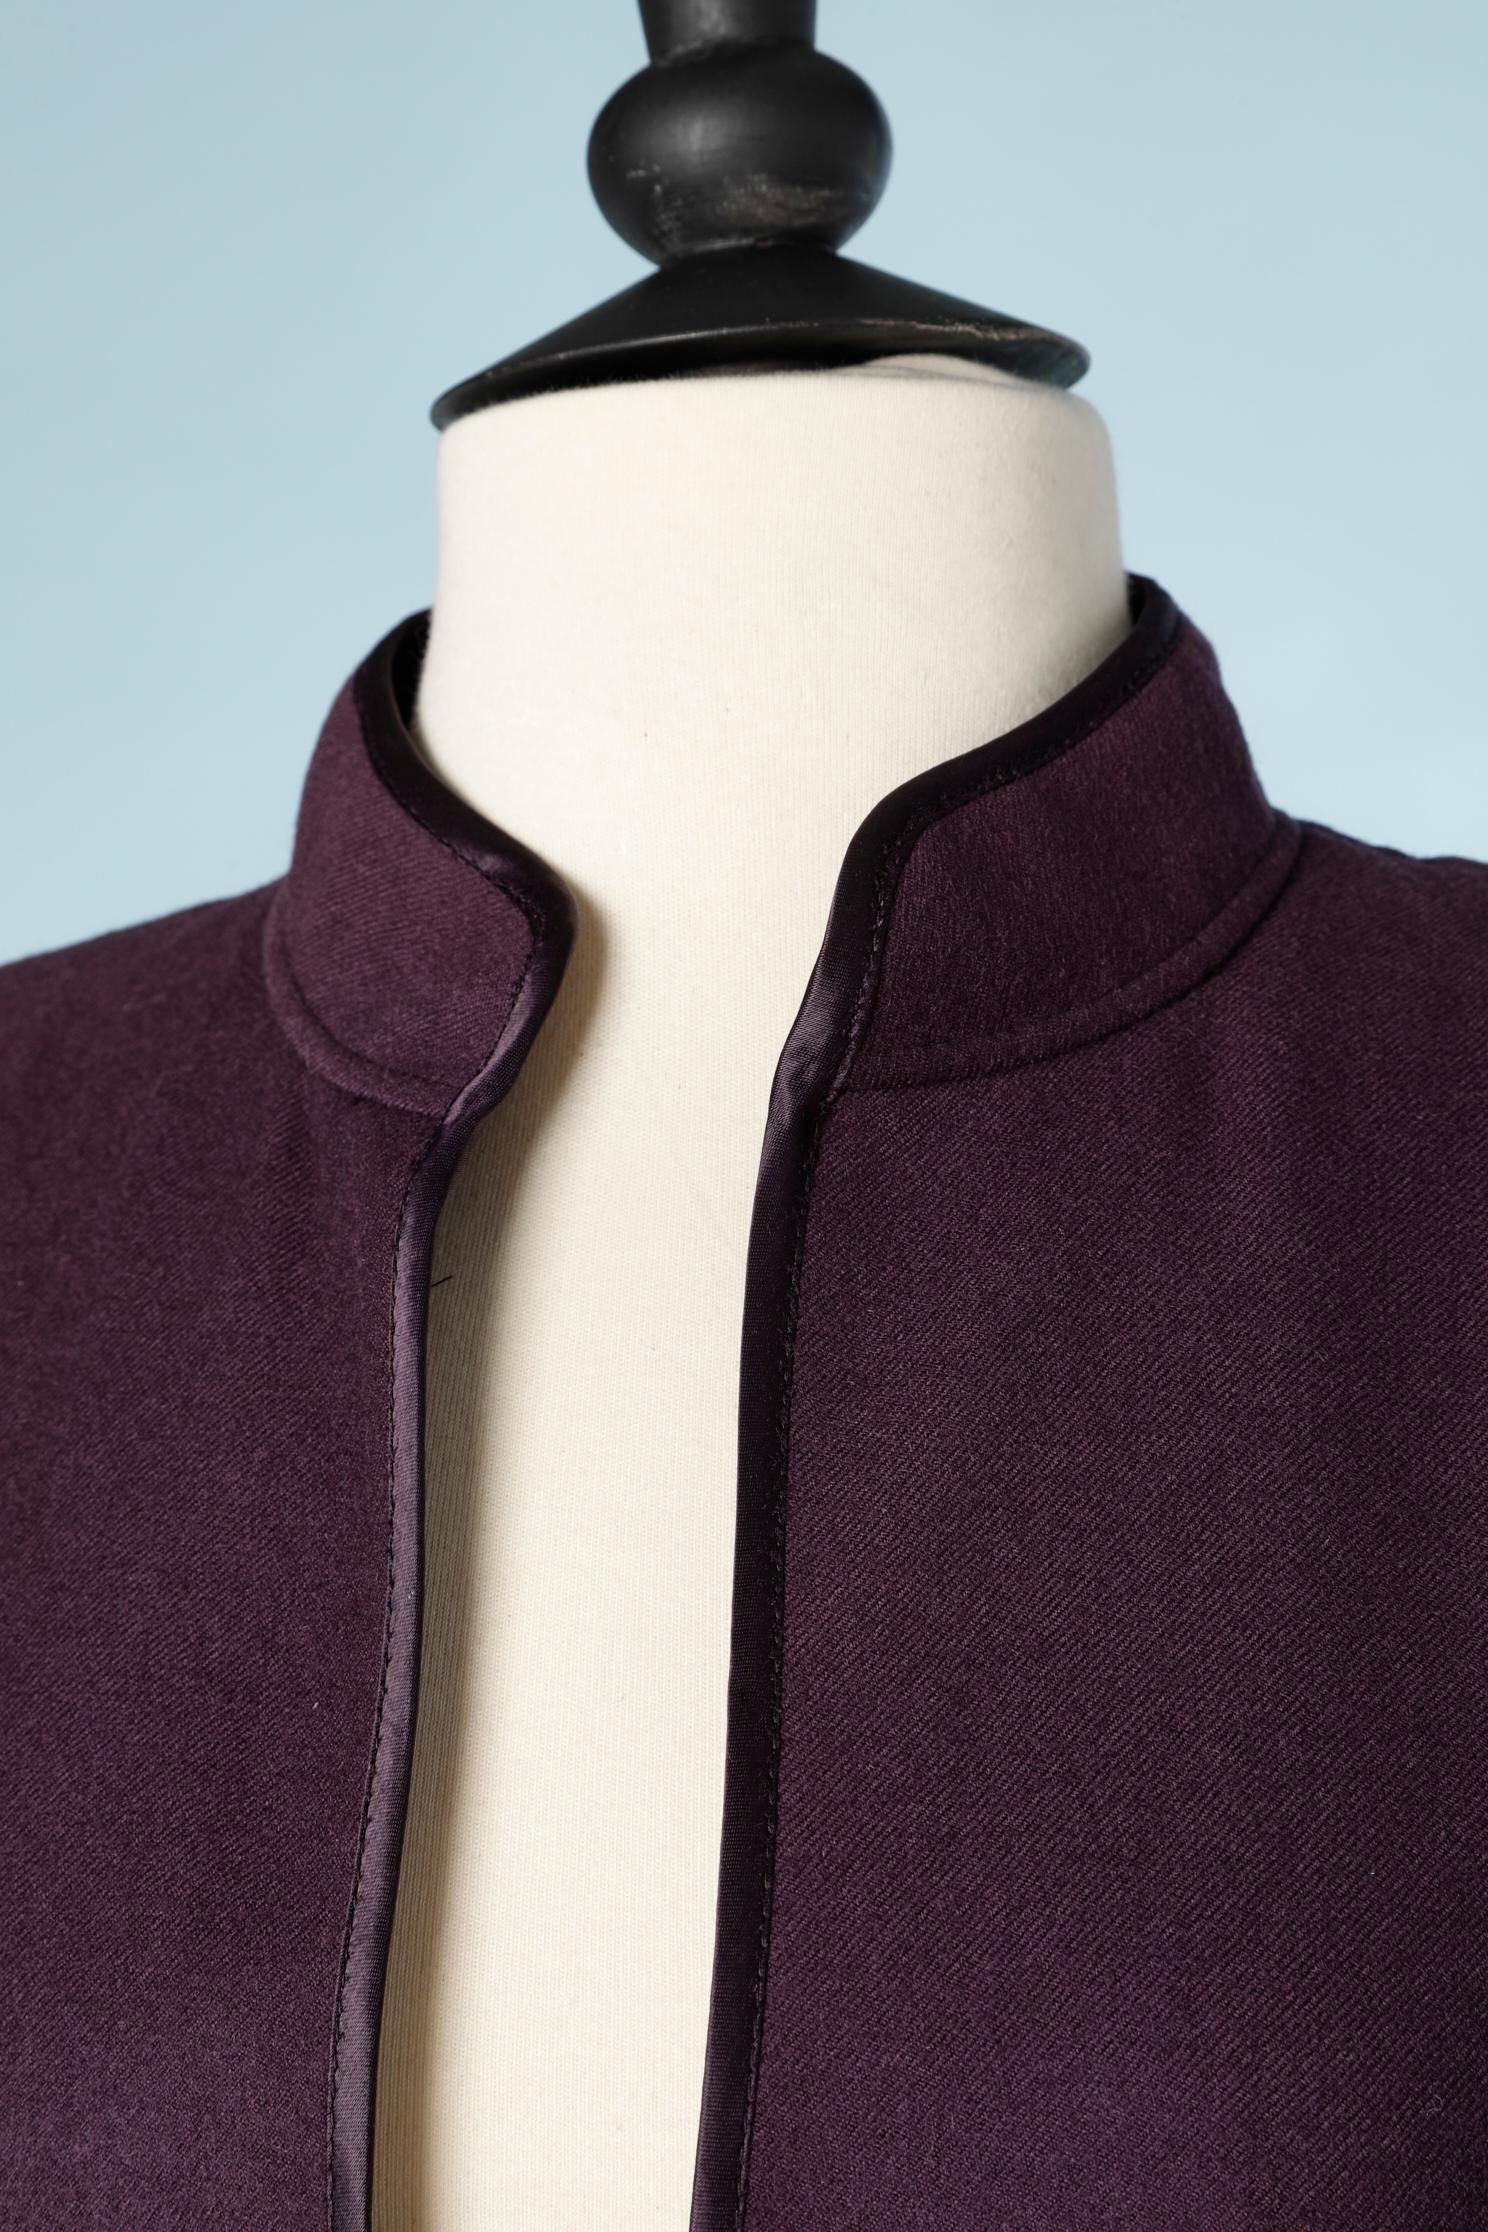 Purple wool skirt suit . No fabric composition tag but the lining is probably acetate or rayon. The lining is branded.
Thin shoulder pad. Piping inside the jacket. 
SIZE M 